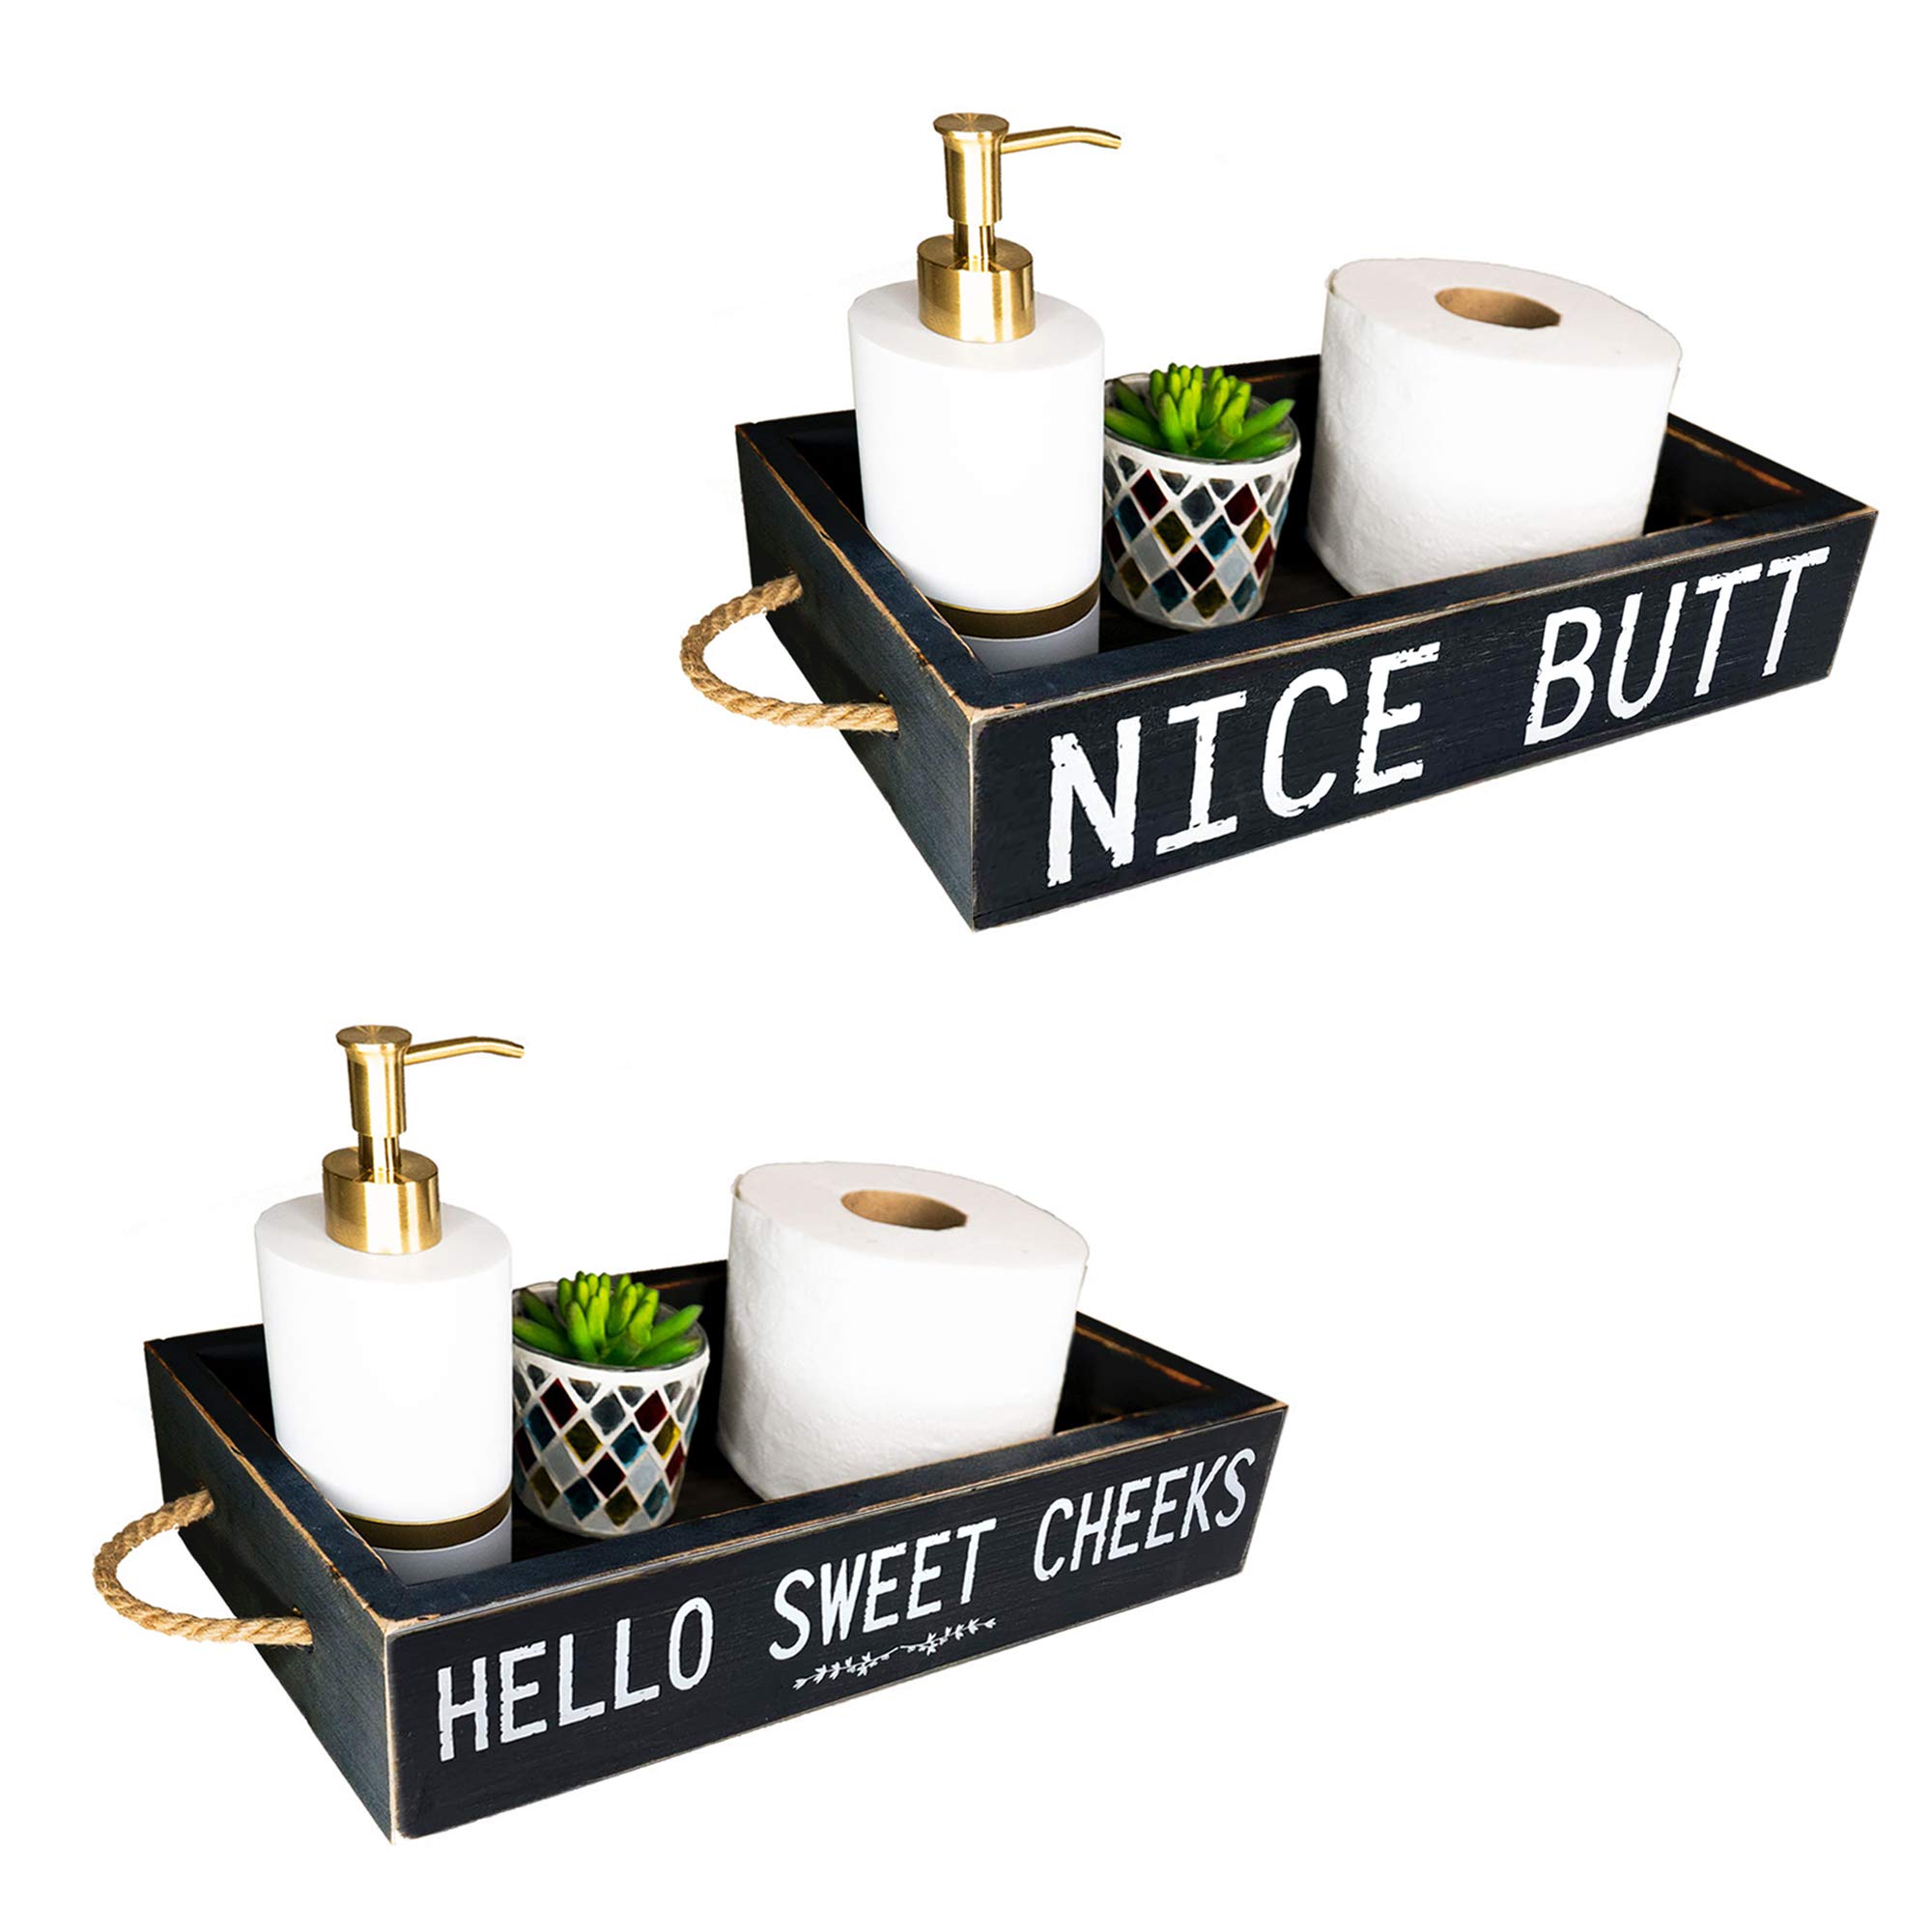 Nice Butt Bathroom Decor Box, 2 Sides with Funny Sayings